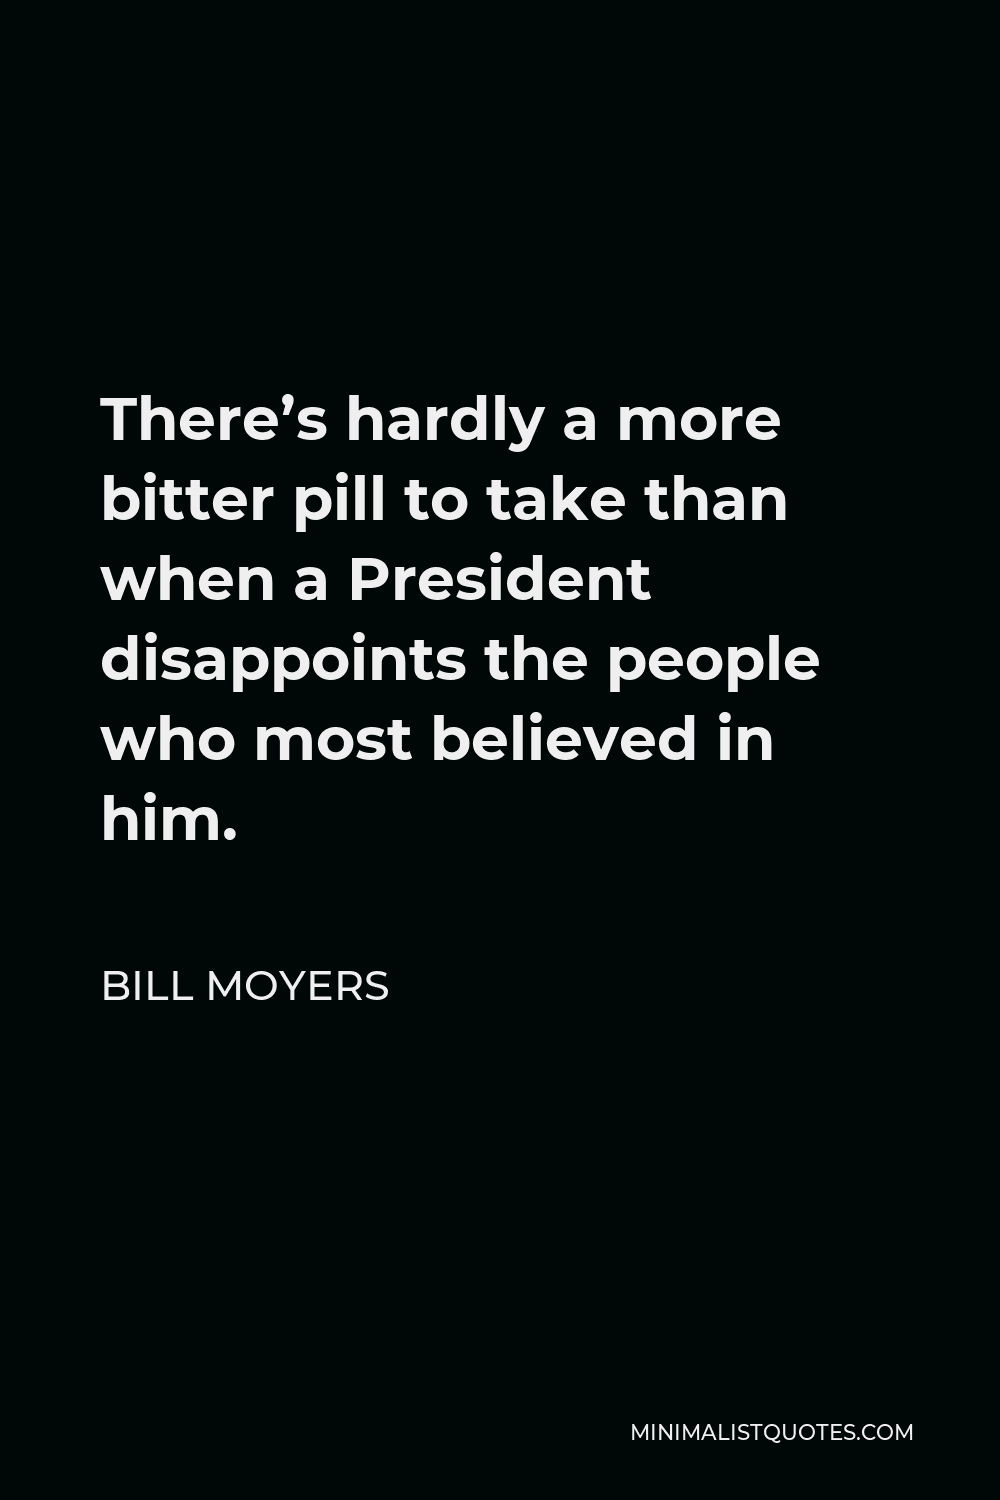 Bill Moyers Quote - There’s hardly a more bitter pill to take than when a President disappoints the people who most believed in him.